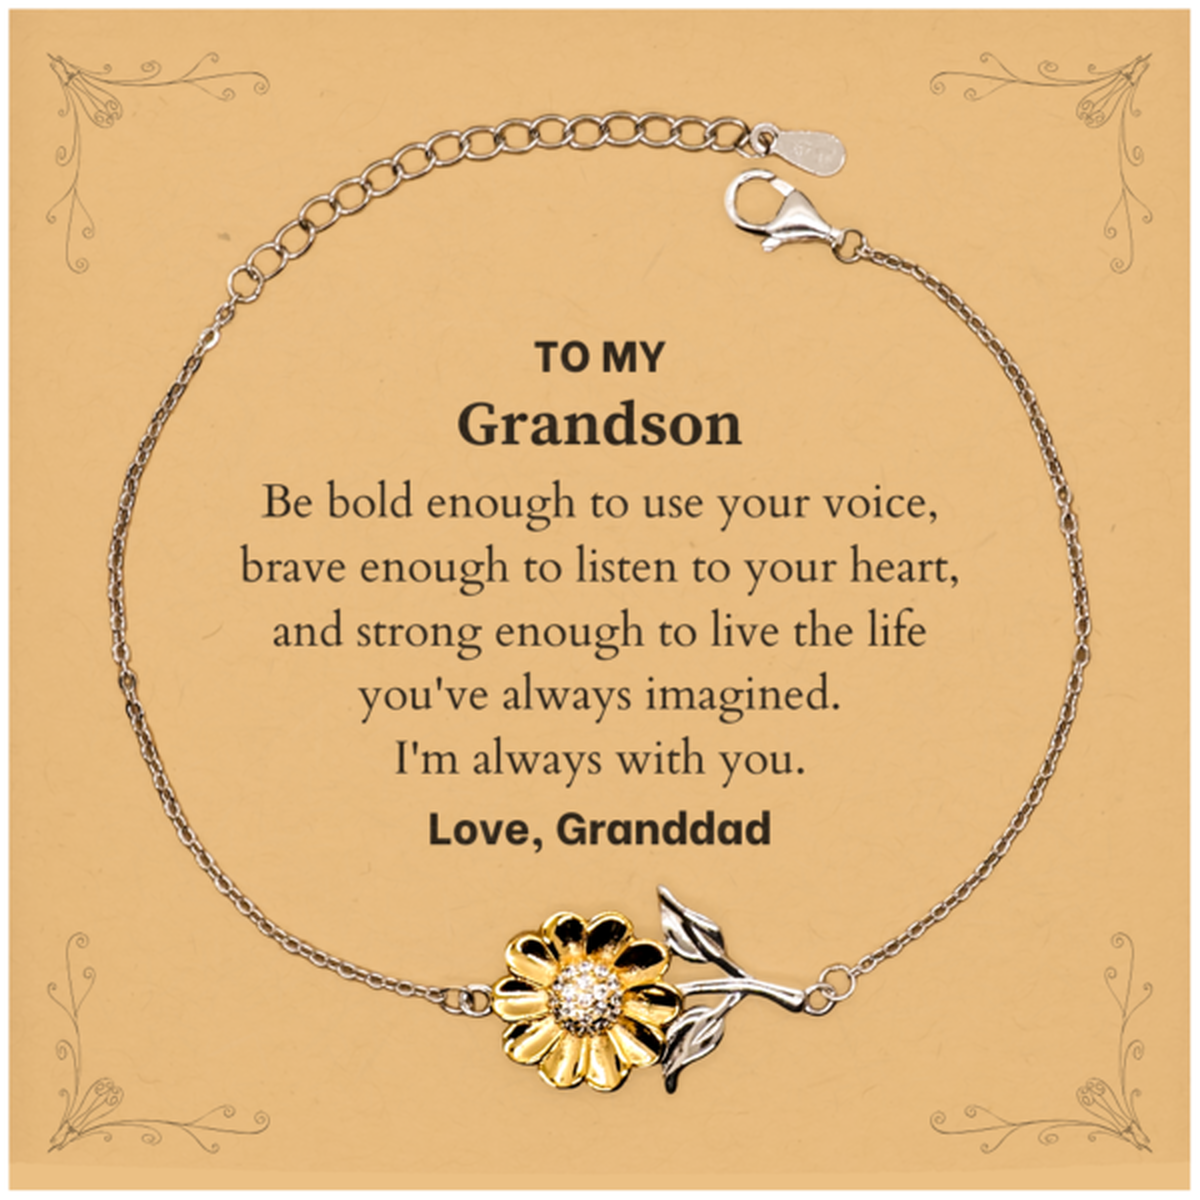 Keepsake Grandson Sunflower Bracelet Gift Idea Graduation Christmas Birthday Grandson from Granddad, Grandson Be bold enough to use your voice, brave enough to listen to your heart. Love, Granddad